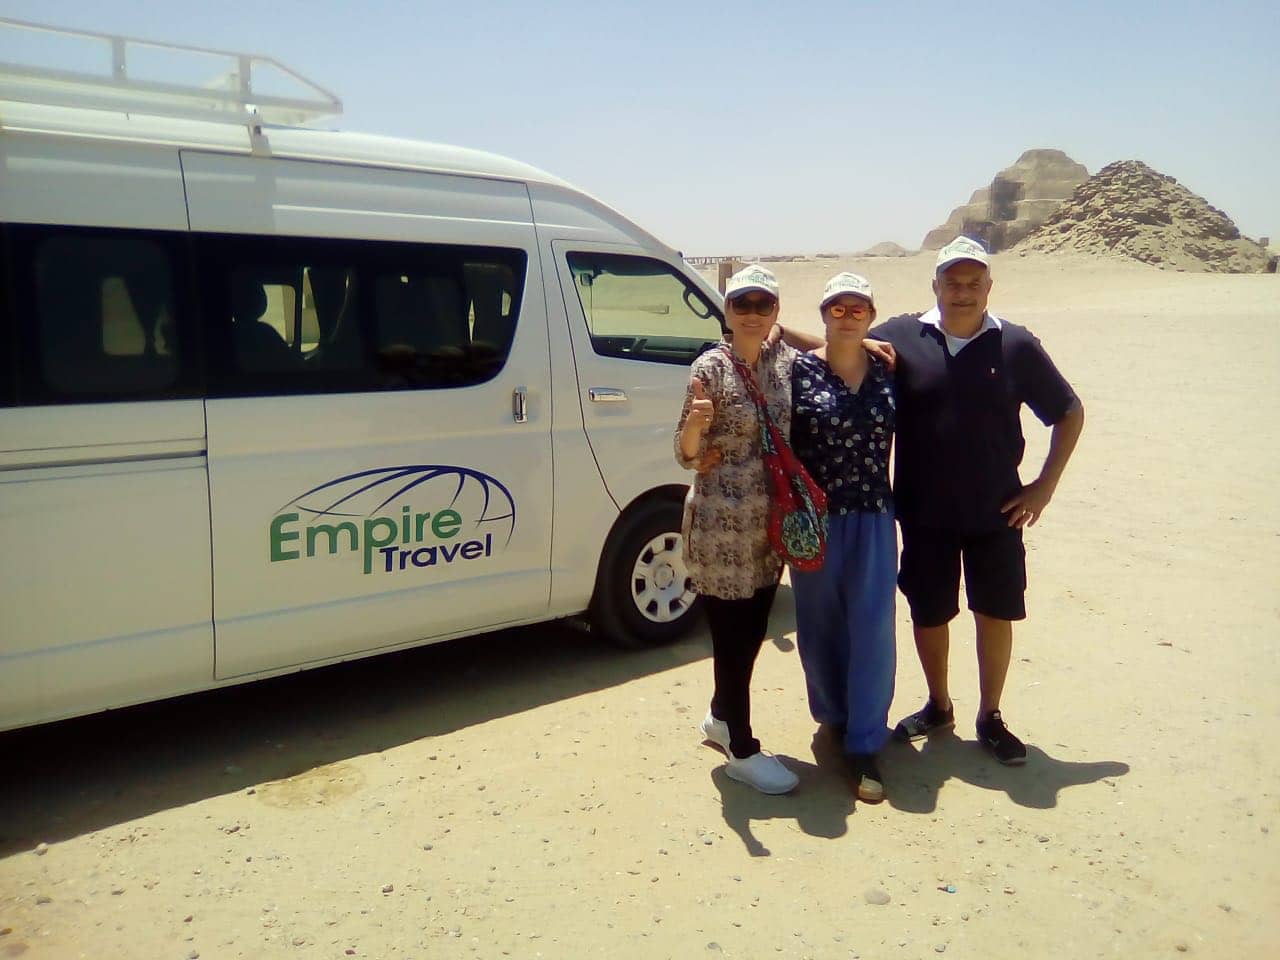 Travellers Photo with Empire Travel Bus